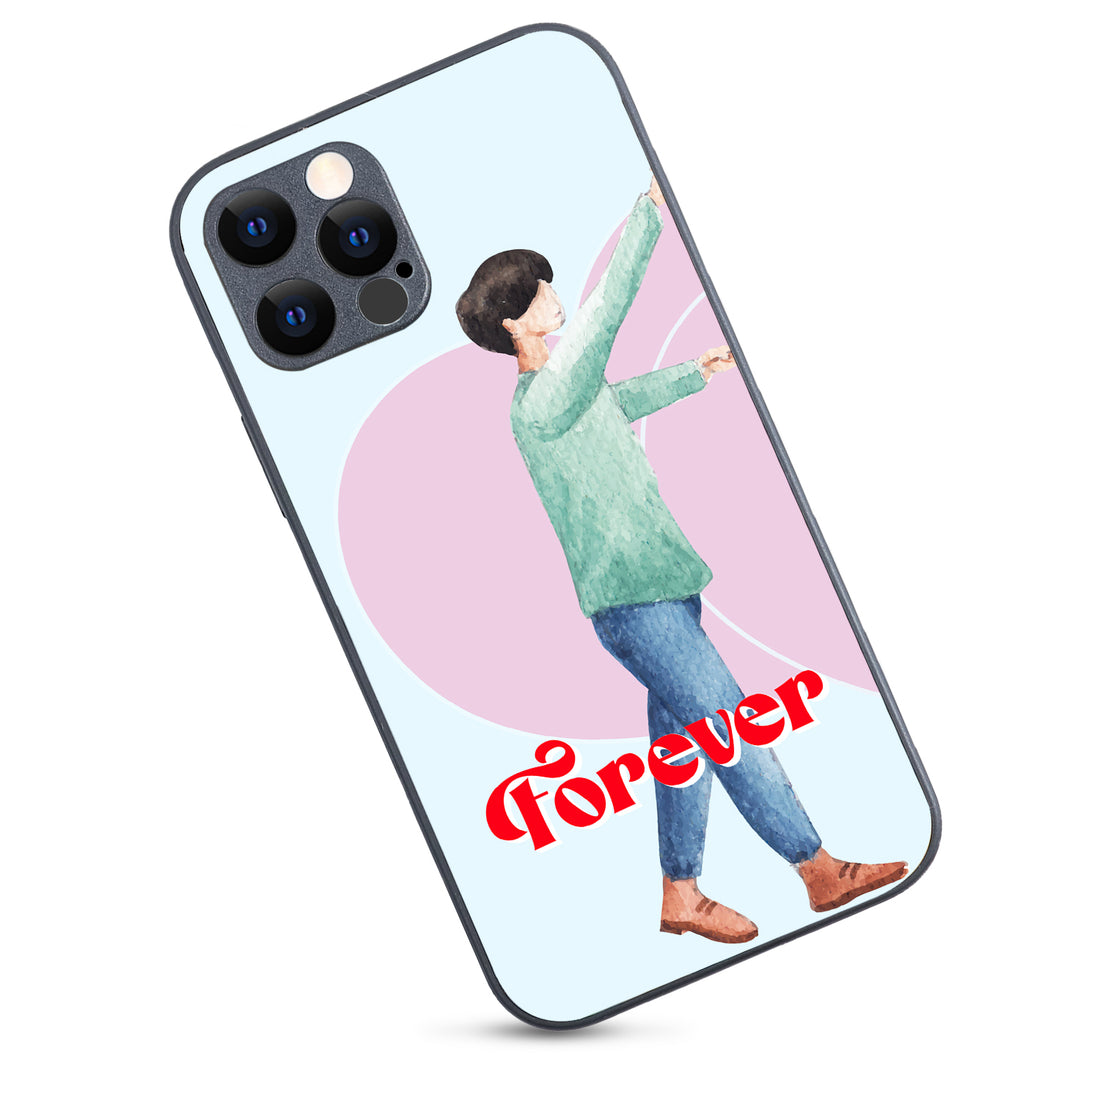 Forever Love Boy Couple iPhone 12 Pro Case